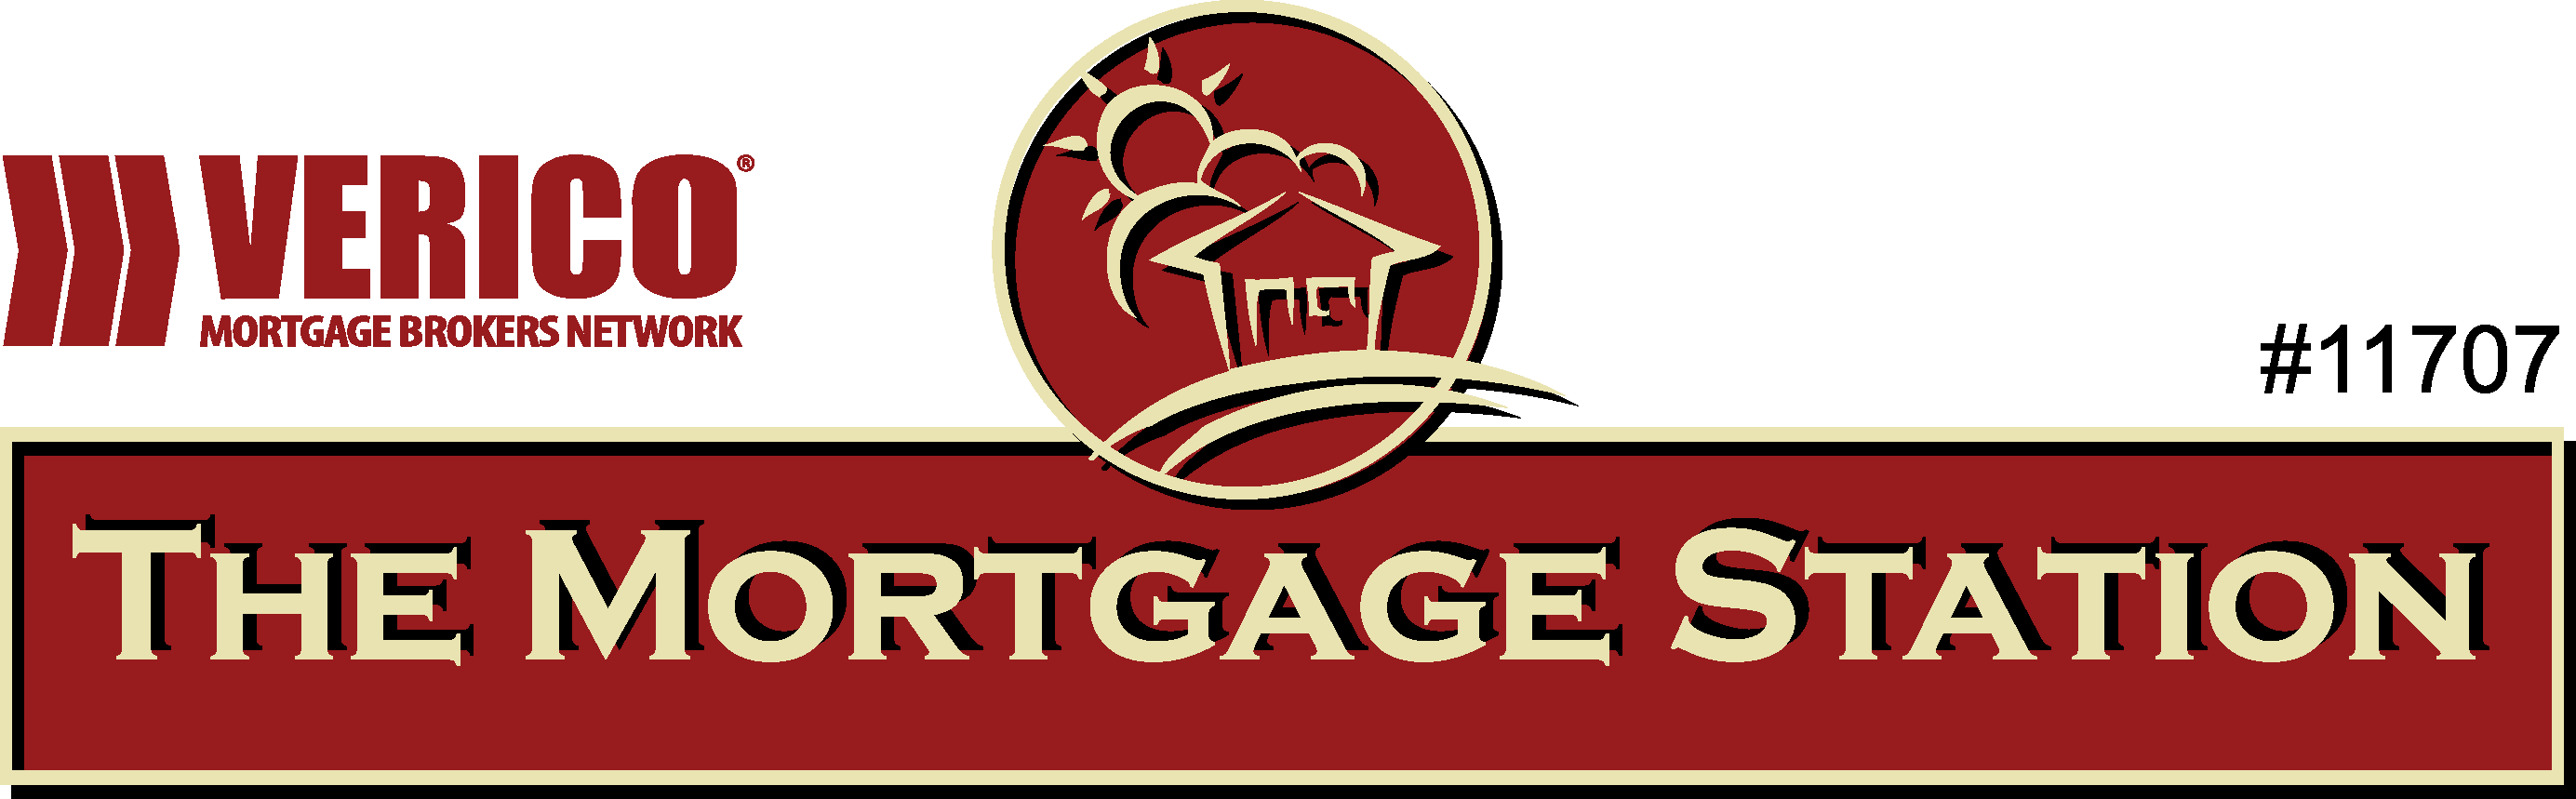 The Mortgage Station Logo 